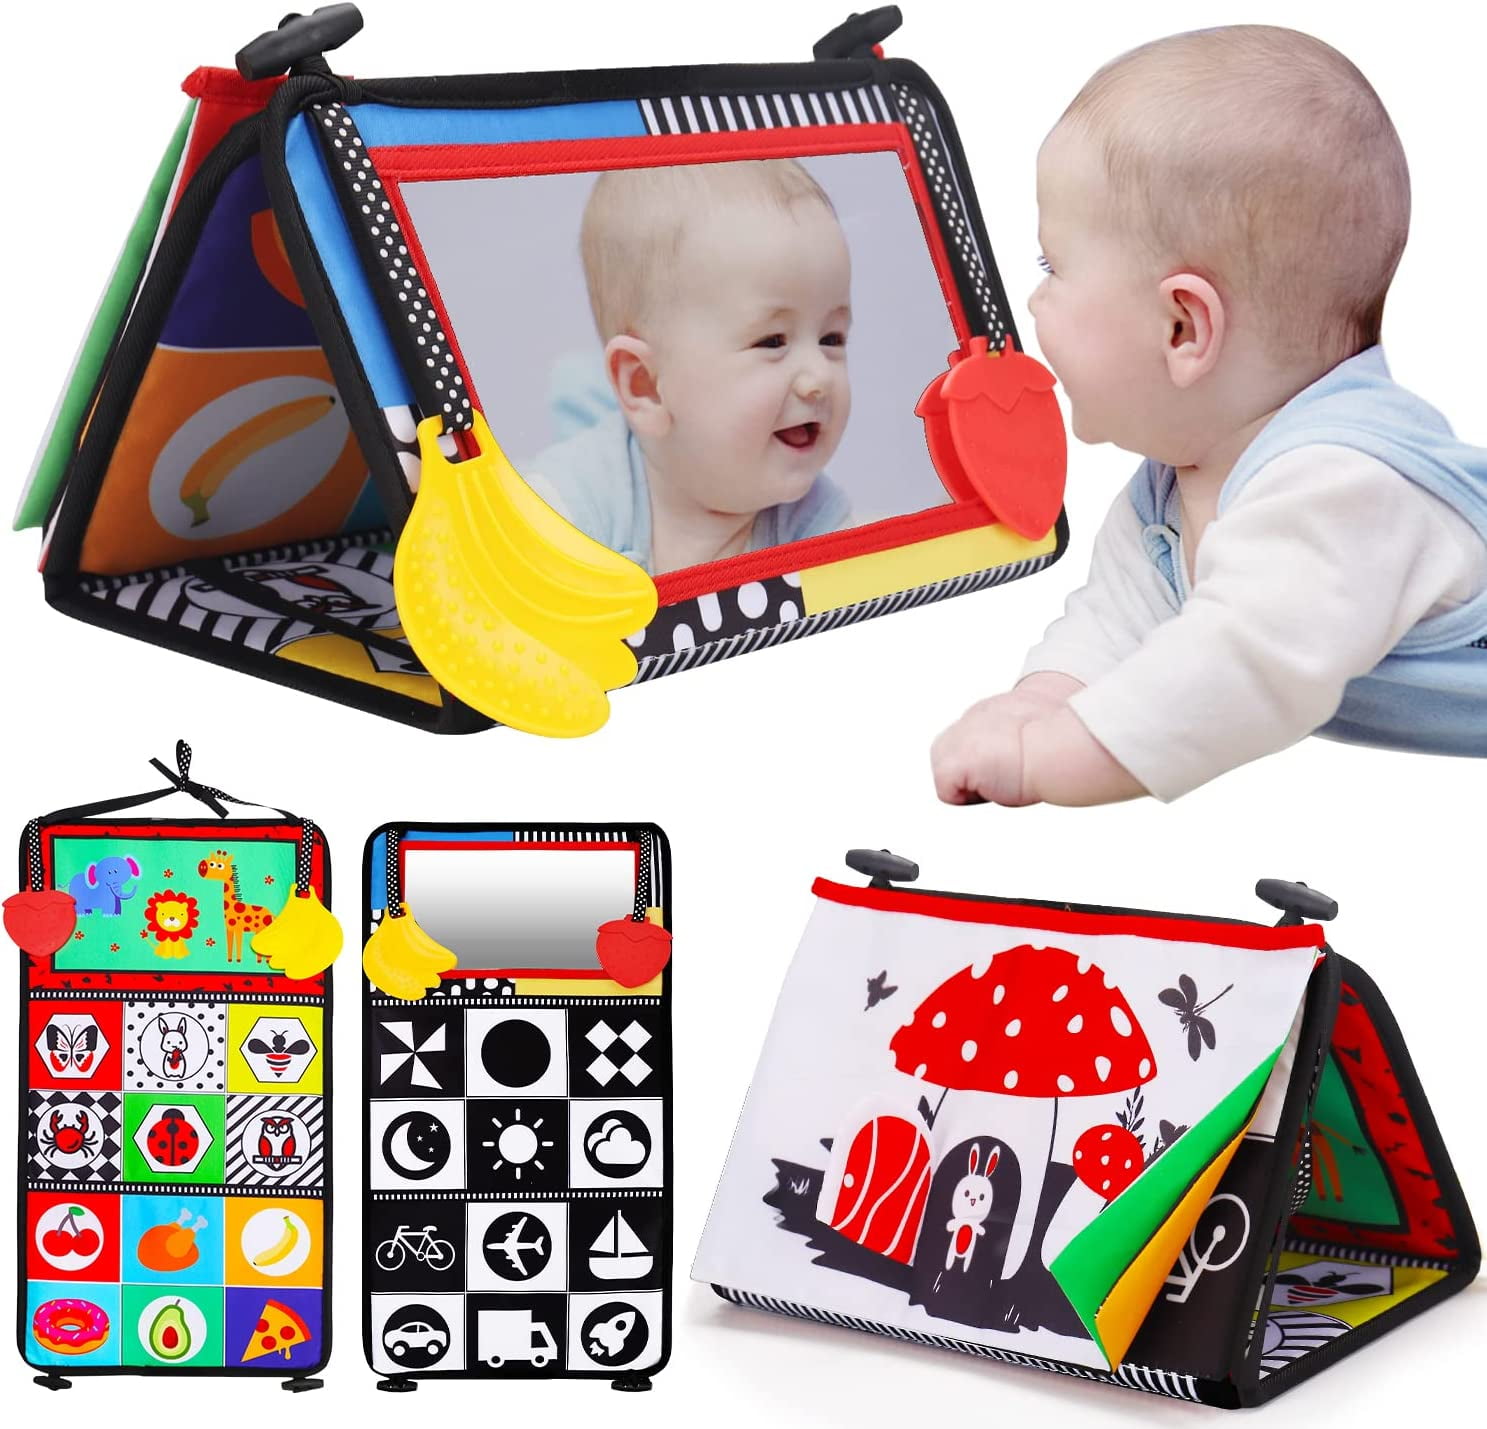 Joyfia Baby Mirror Toys for Tummy Time High Contrast Black and White Toys Boys Girls Essentials Newborn Infant 0-12 Months Old Brain Development Soft Safe Floor Mirror with Crinkle Book for Play 